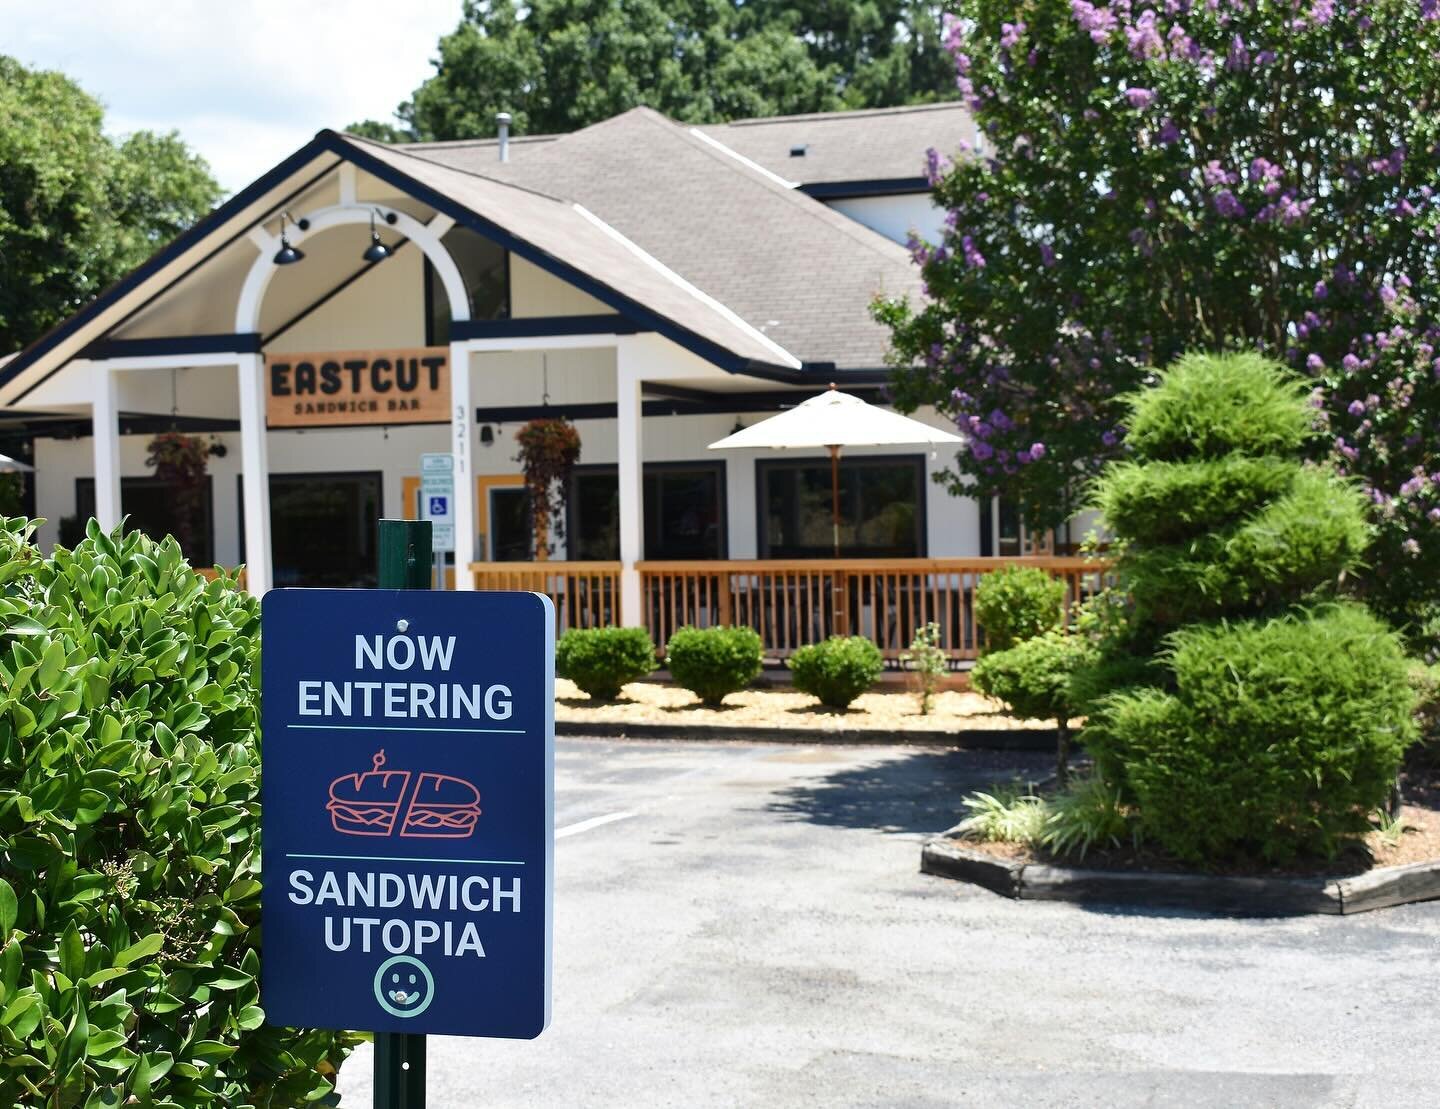 On this Employee Appreciation Day (and really everyday) we want to give a shout out to all the members of Team Eastcut. Eastcut only exists because of our amazing Team Members, who show up everyday to create the Sandwich Utopia experience our Durham 